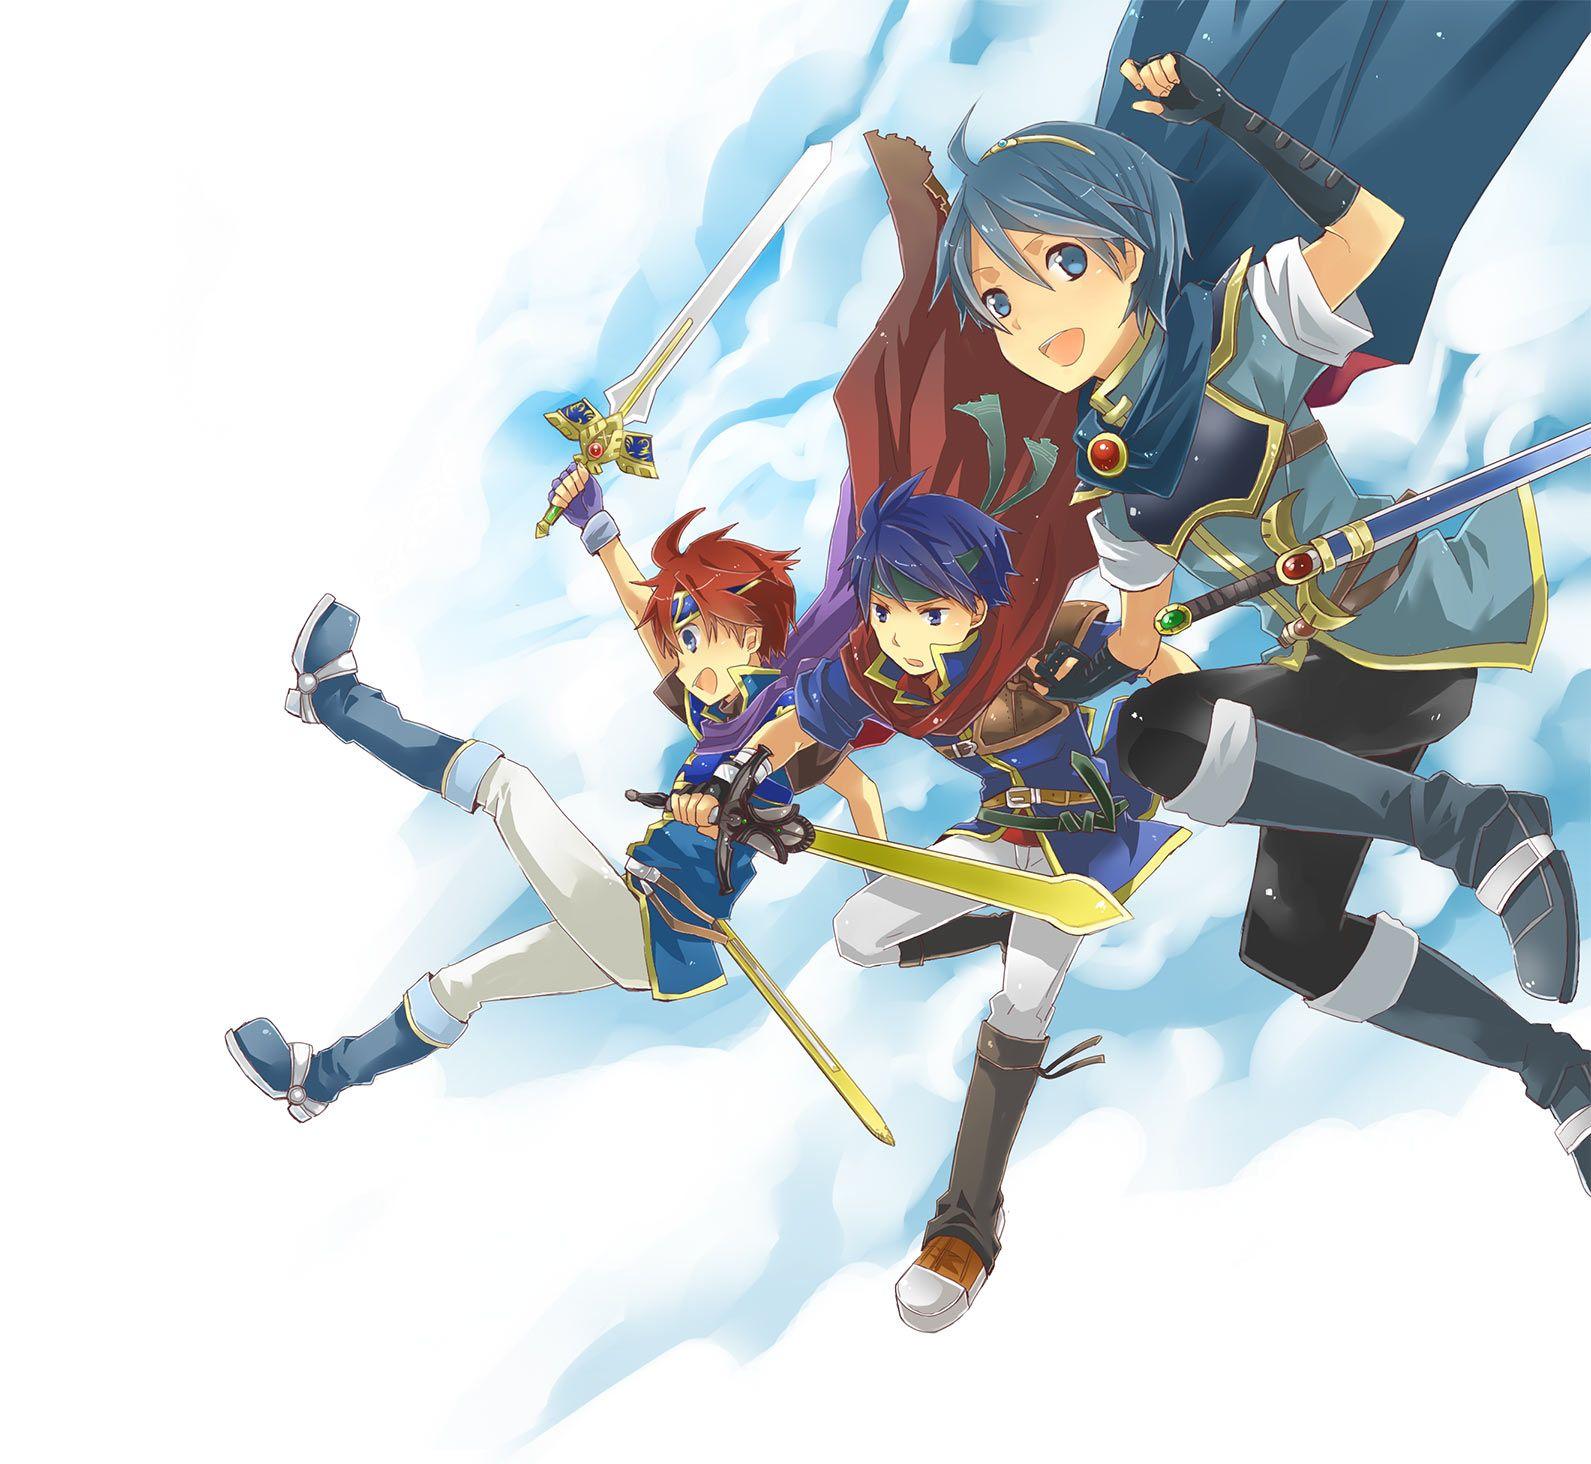 Roy, Ike, And Marth Being Themselves. Anime Cartoony Things